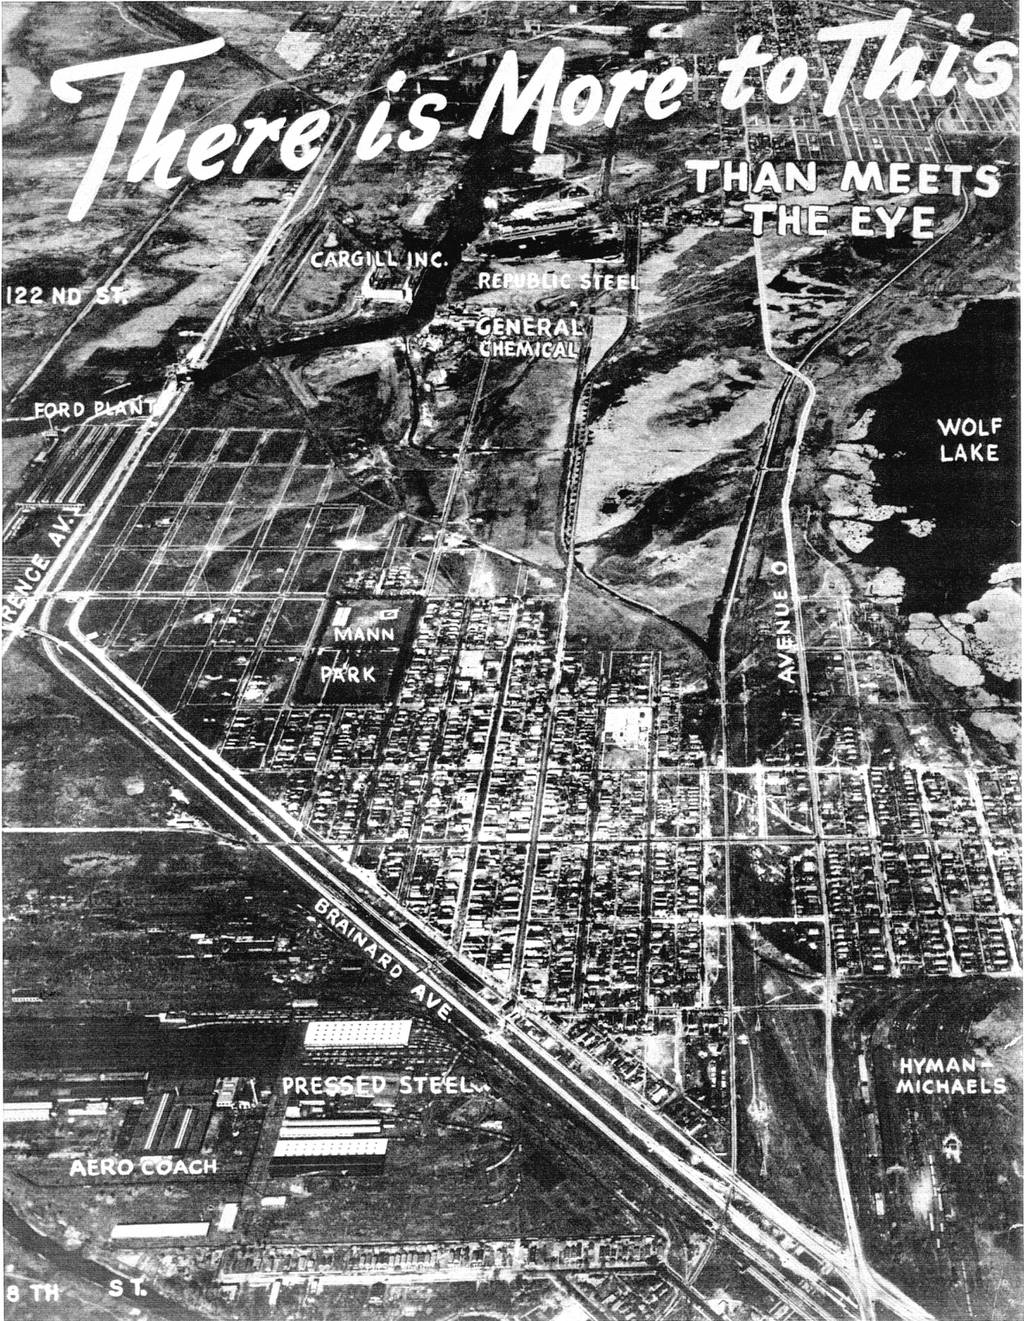 An aerial view of Hegewisch is featured in a sales brochure in the Southeast Chicago Historical Society archives promoting it to the community.